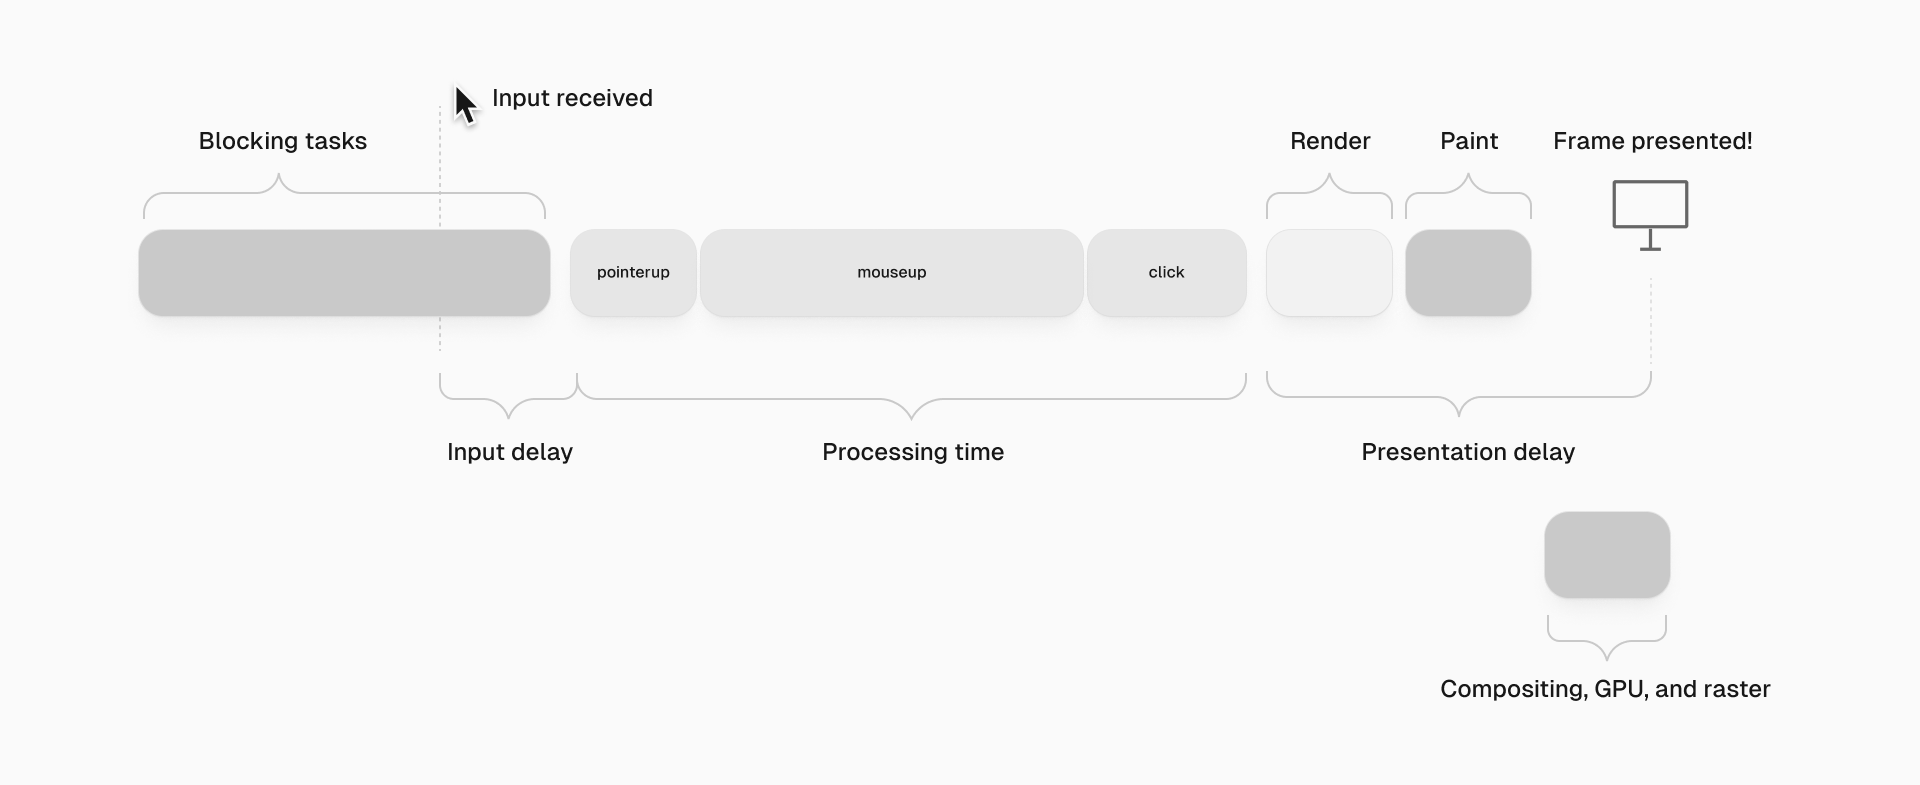 An interaction's lifecycle starts with an input delay until event handlers kick in, often due to prolonged tasks on the main thread. After the event handlers execute, there's a brief delay before the next frame is displayed.